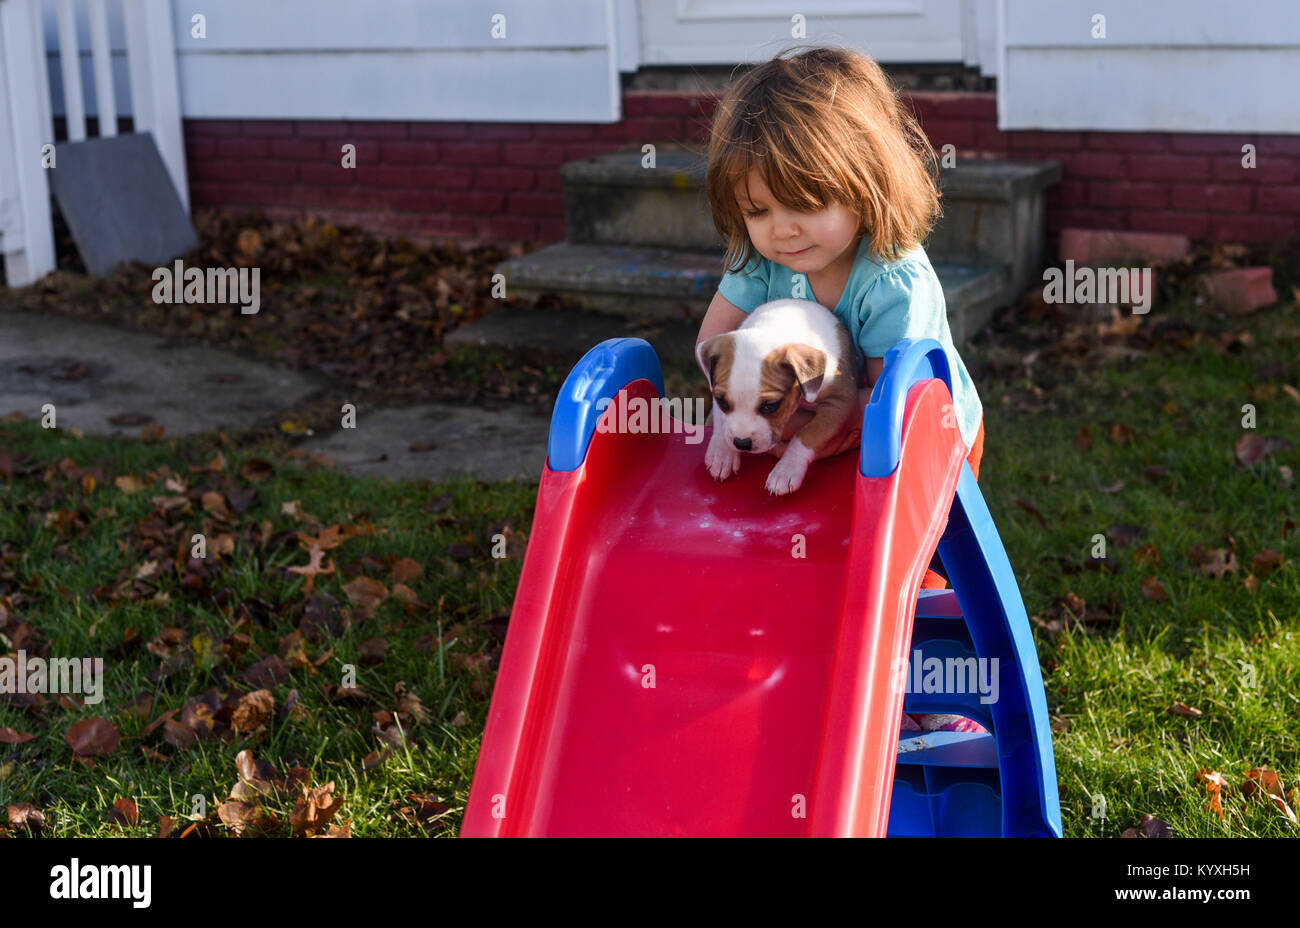 A toddler girl holds a beagle puppy on a red slide in the summer. Stock Photo